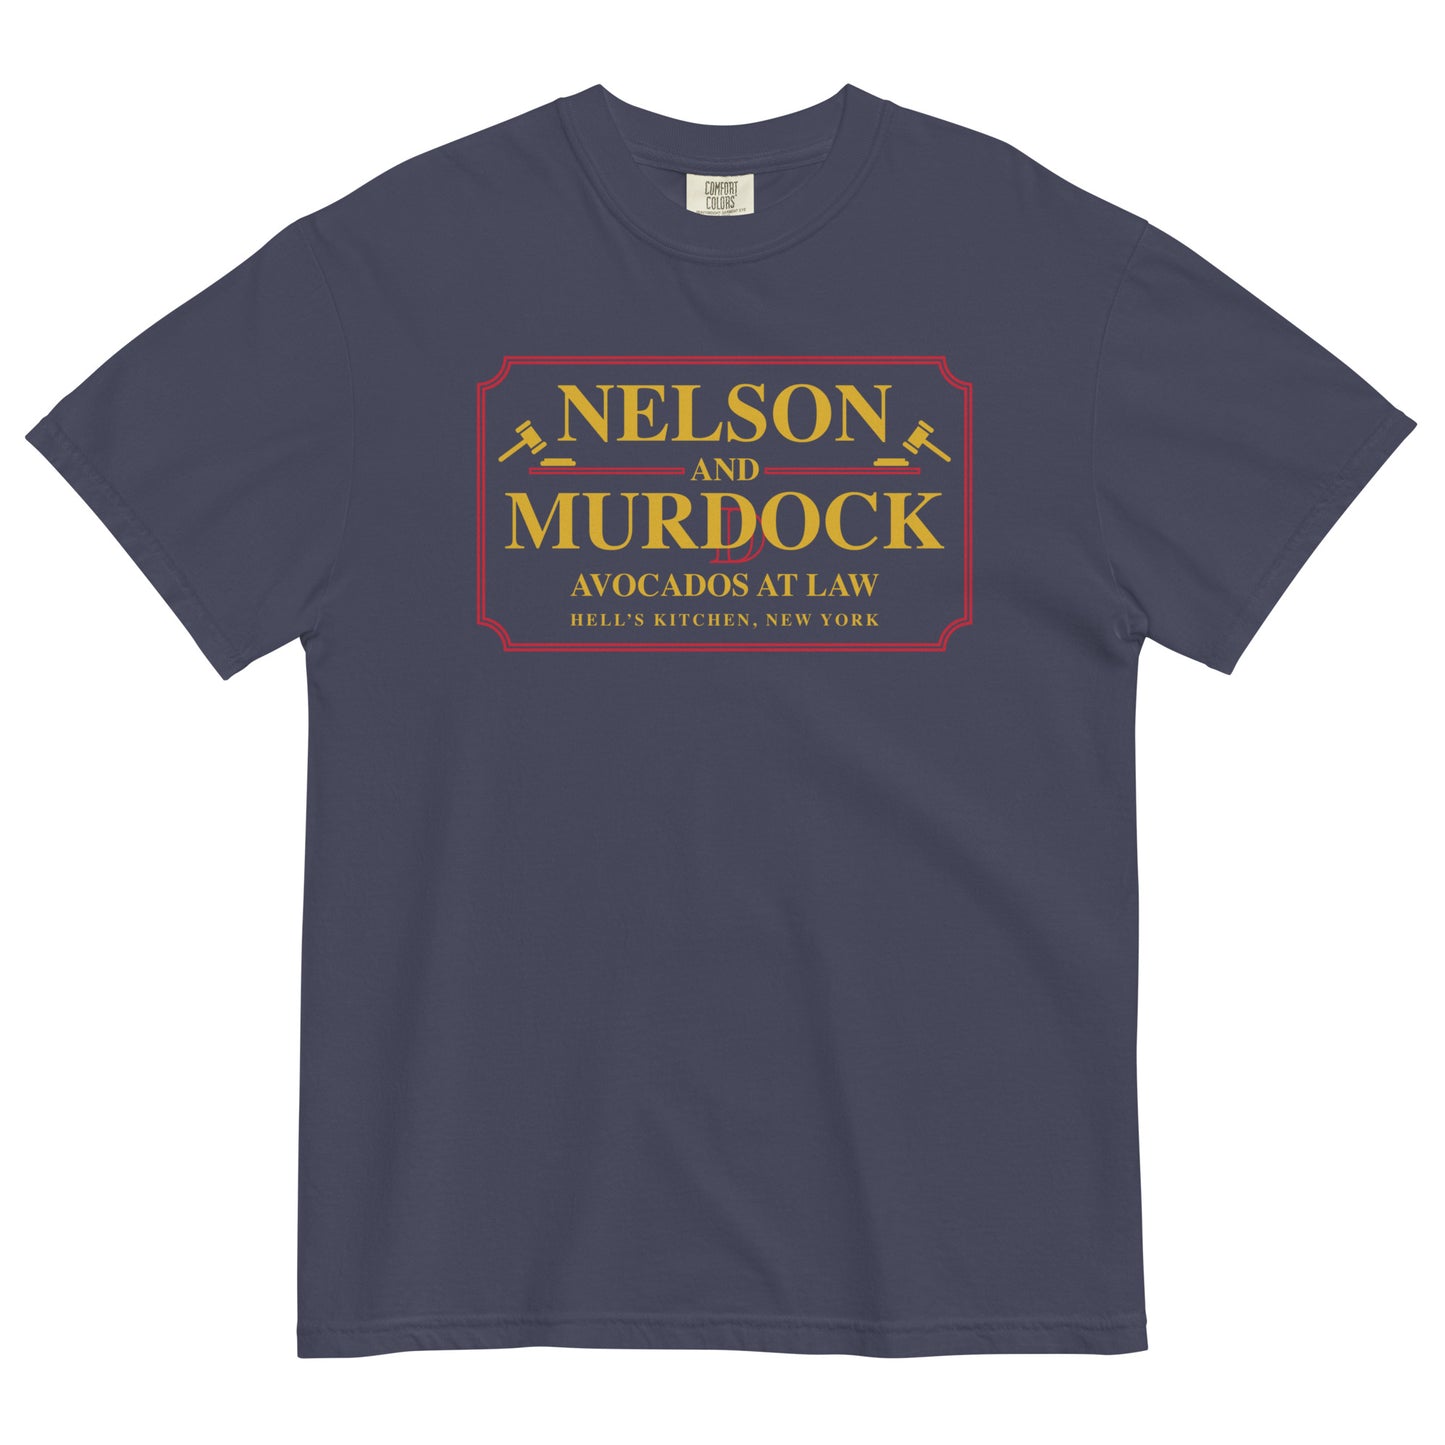 Nelson And Murdock Men's Relaxed Fit Tee